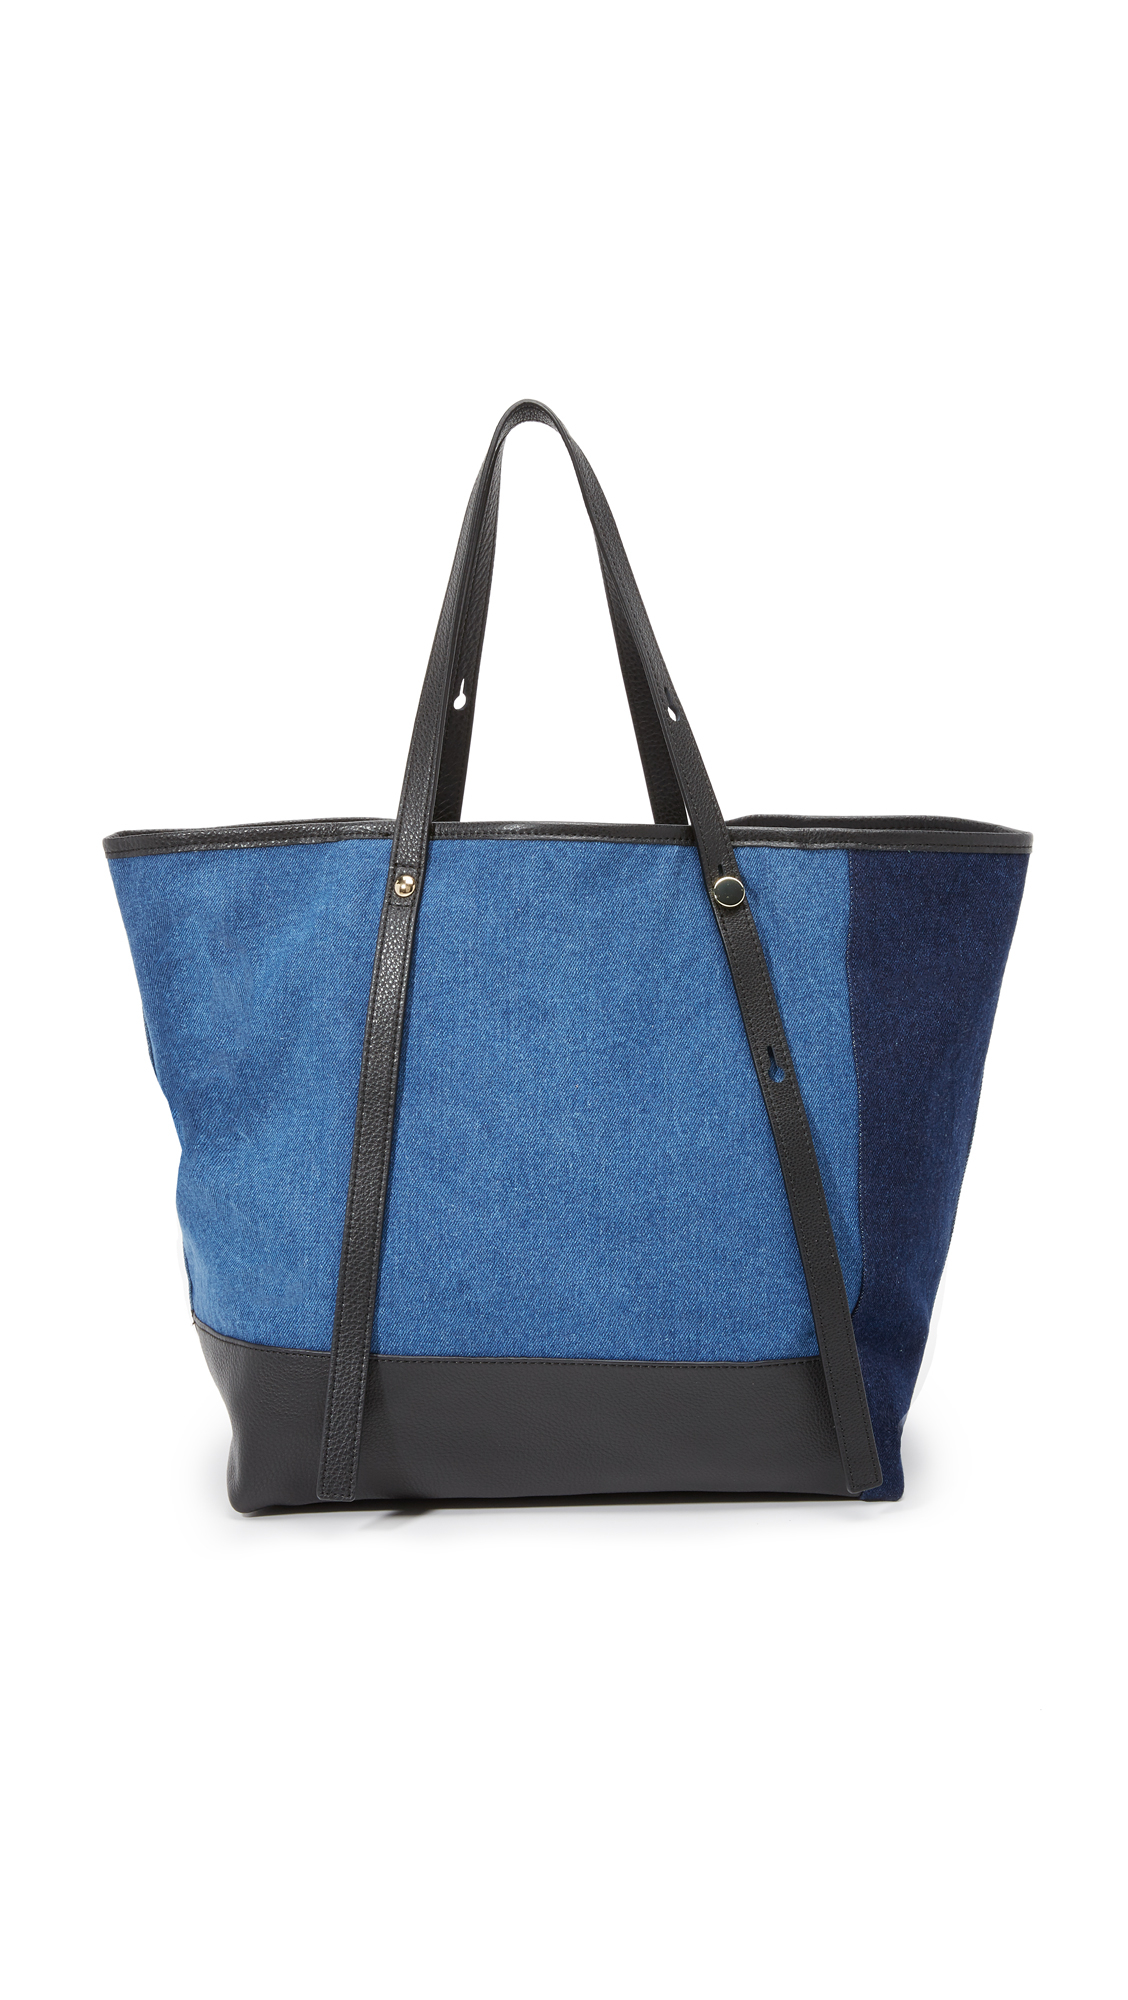 Lyst - See By Chloé Denim Tote in Blue